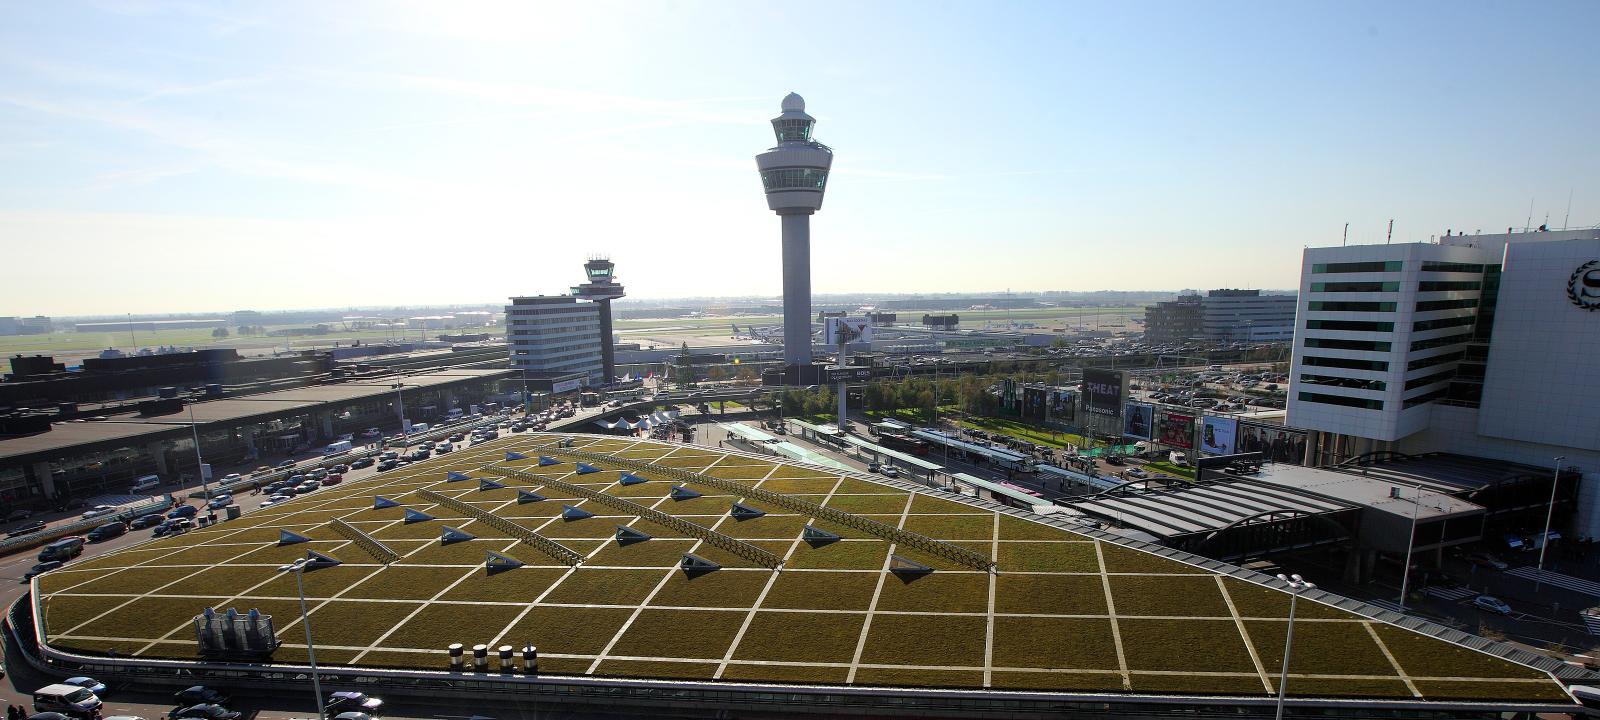 Green roof with photovolaics on a terminal building